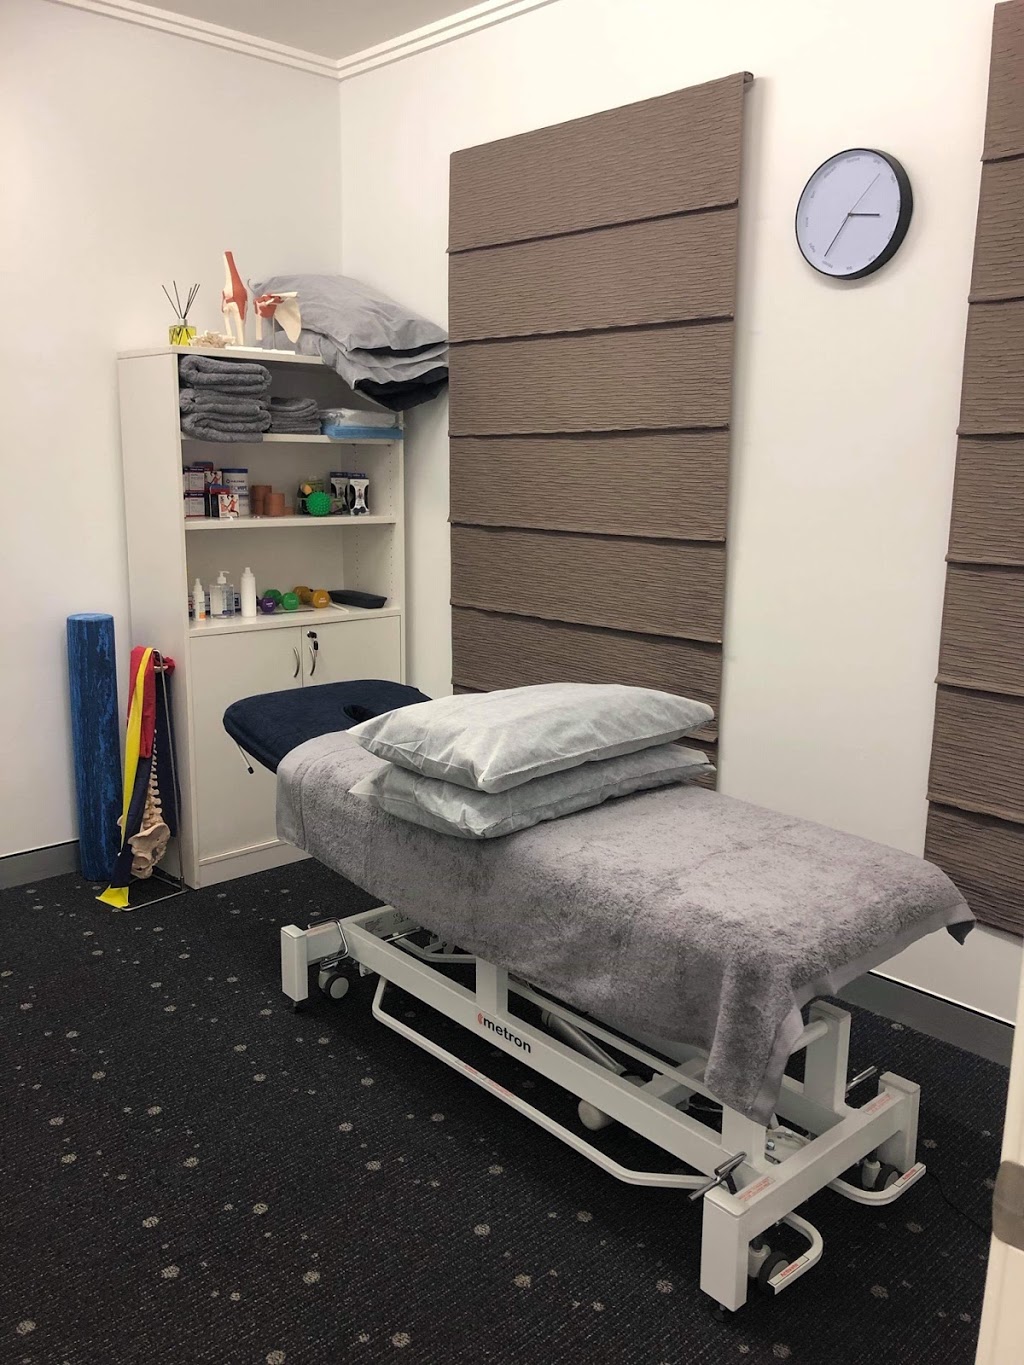 Sports and Spinal Springfield | physiotherapist | 22A Commercial Dr, Springfield QLD 4300, Australia | 0730850100 OR +61 7 3085 0100